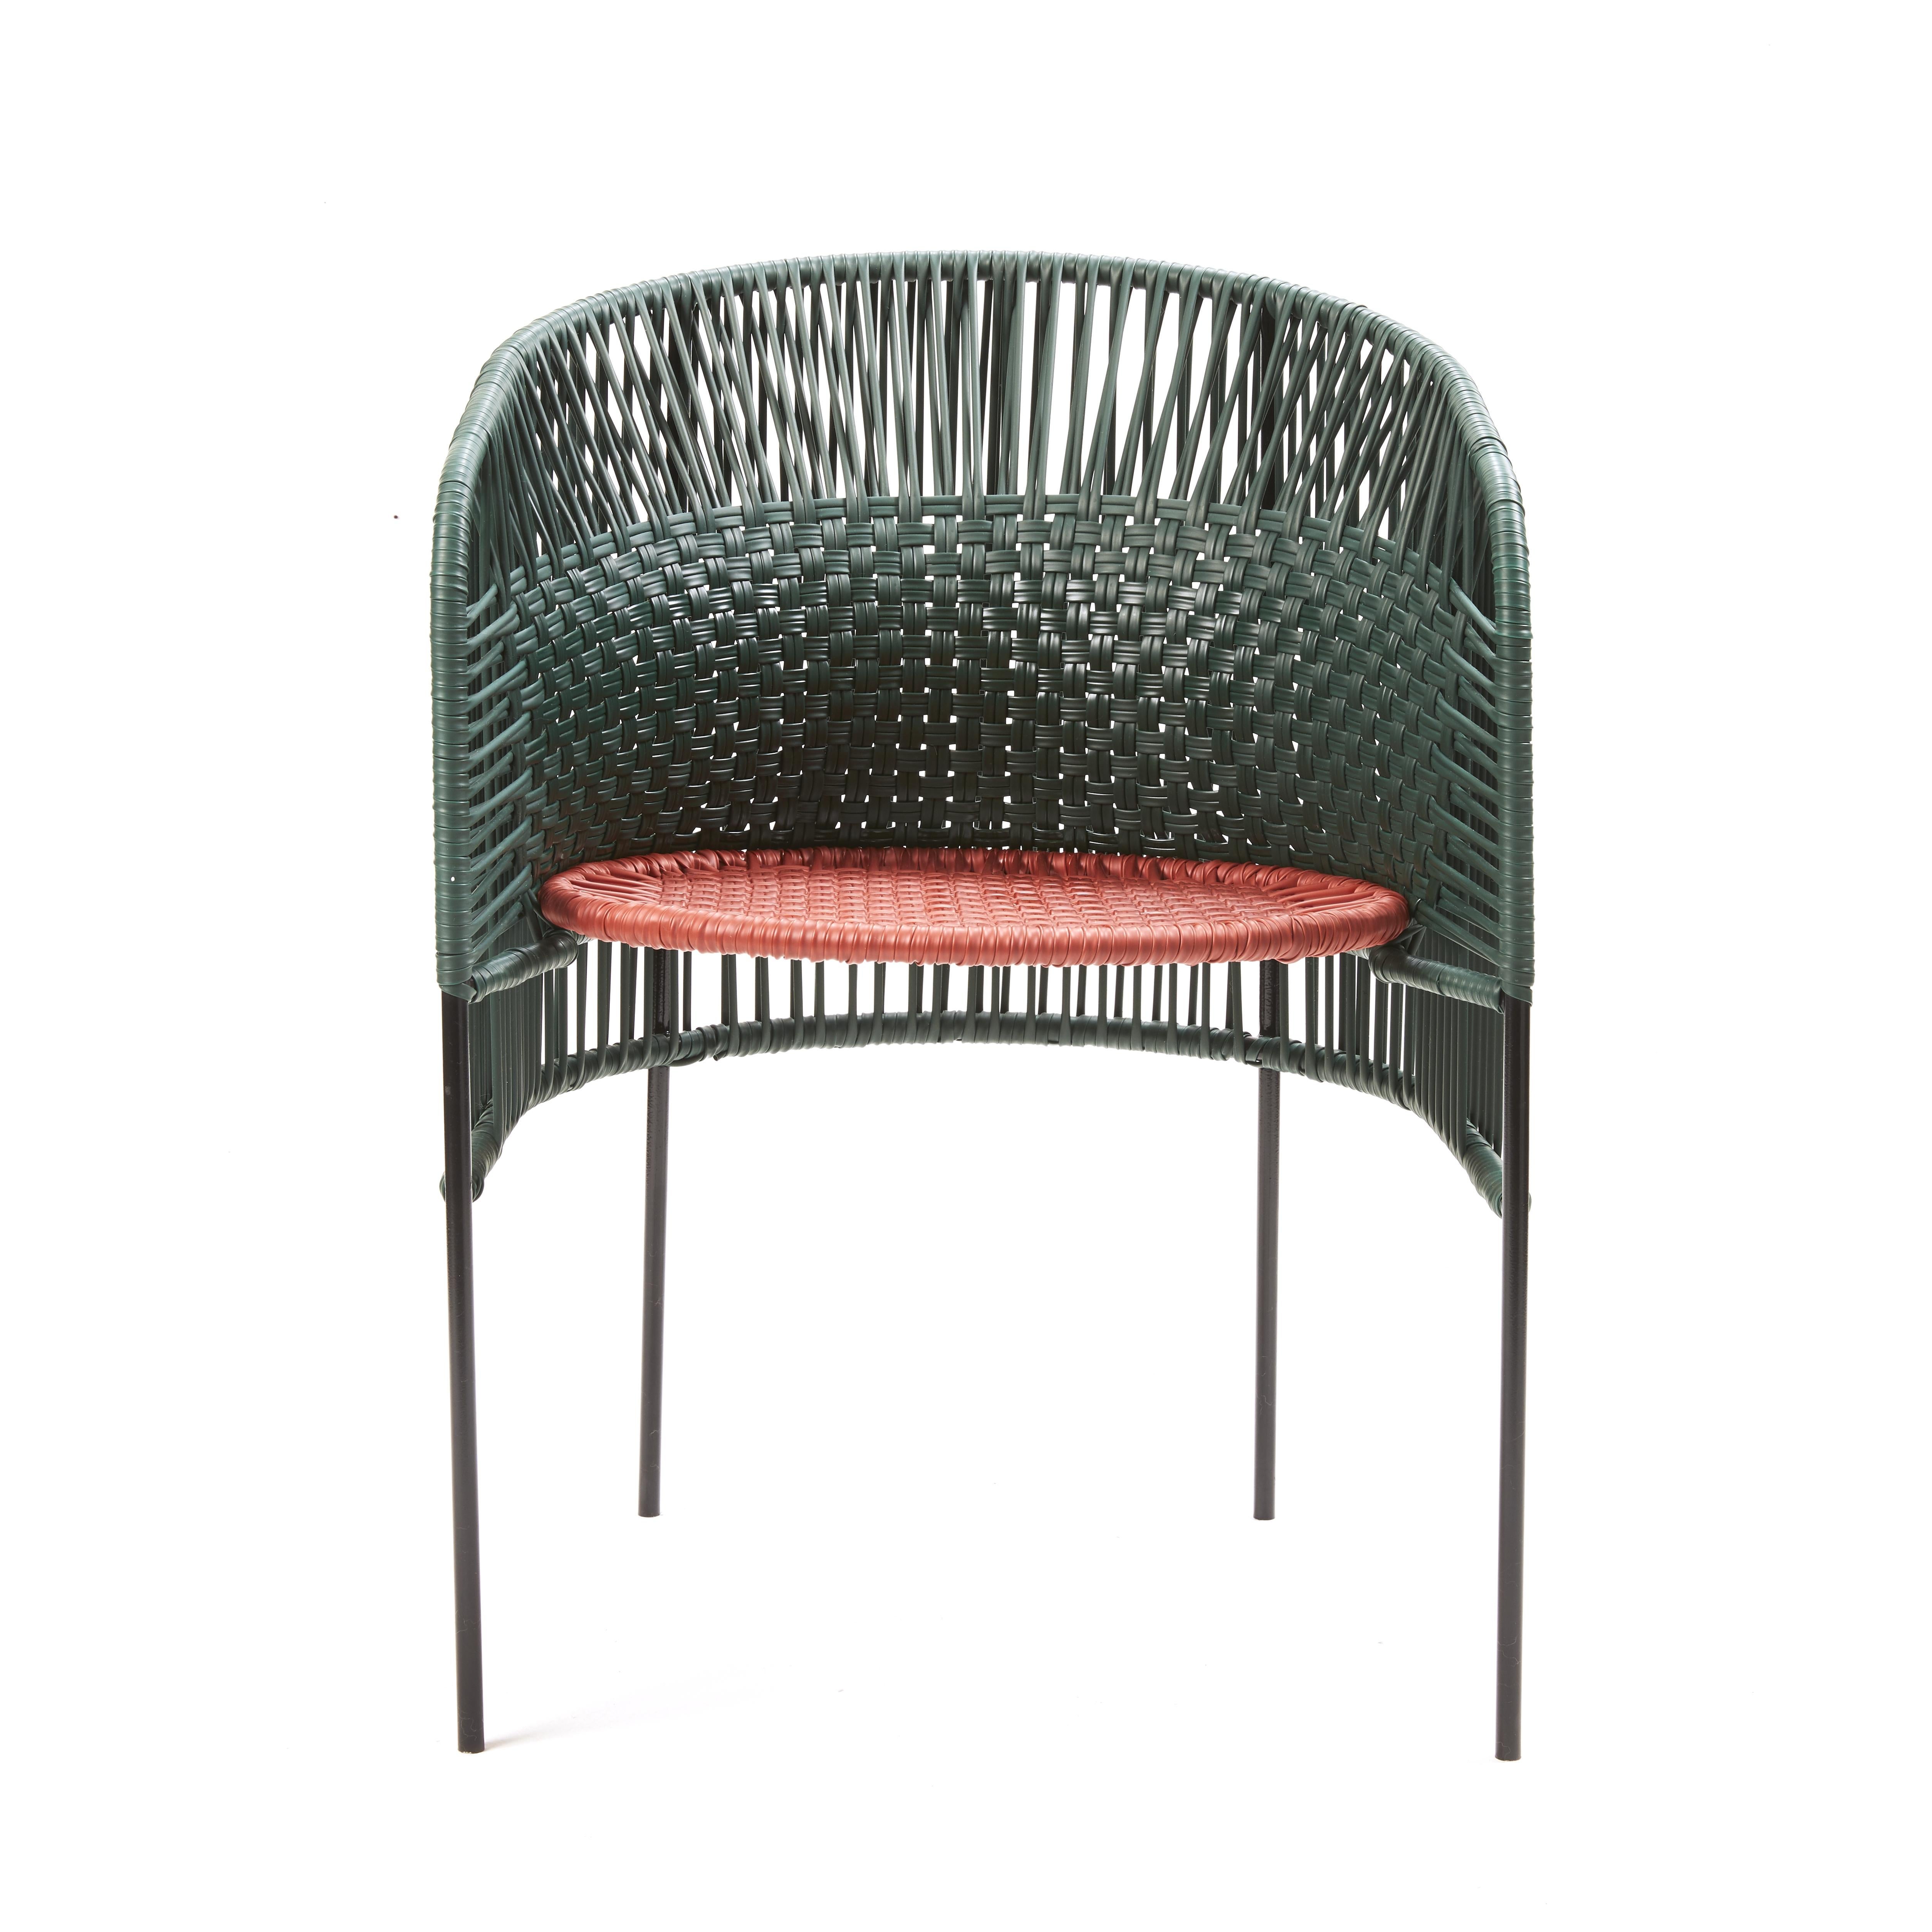 Green Caribe chic dining chair by Sebastian Herkner
Materials: Galvanized and powder-coated tubular steel. PVC strings are made from recycled plastic.
Technique: Made from recycled plastic and weaved by local craftspeople in Colombia.